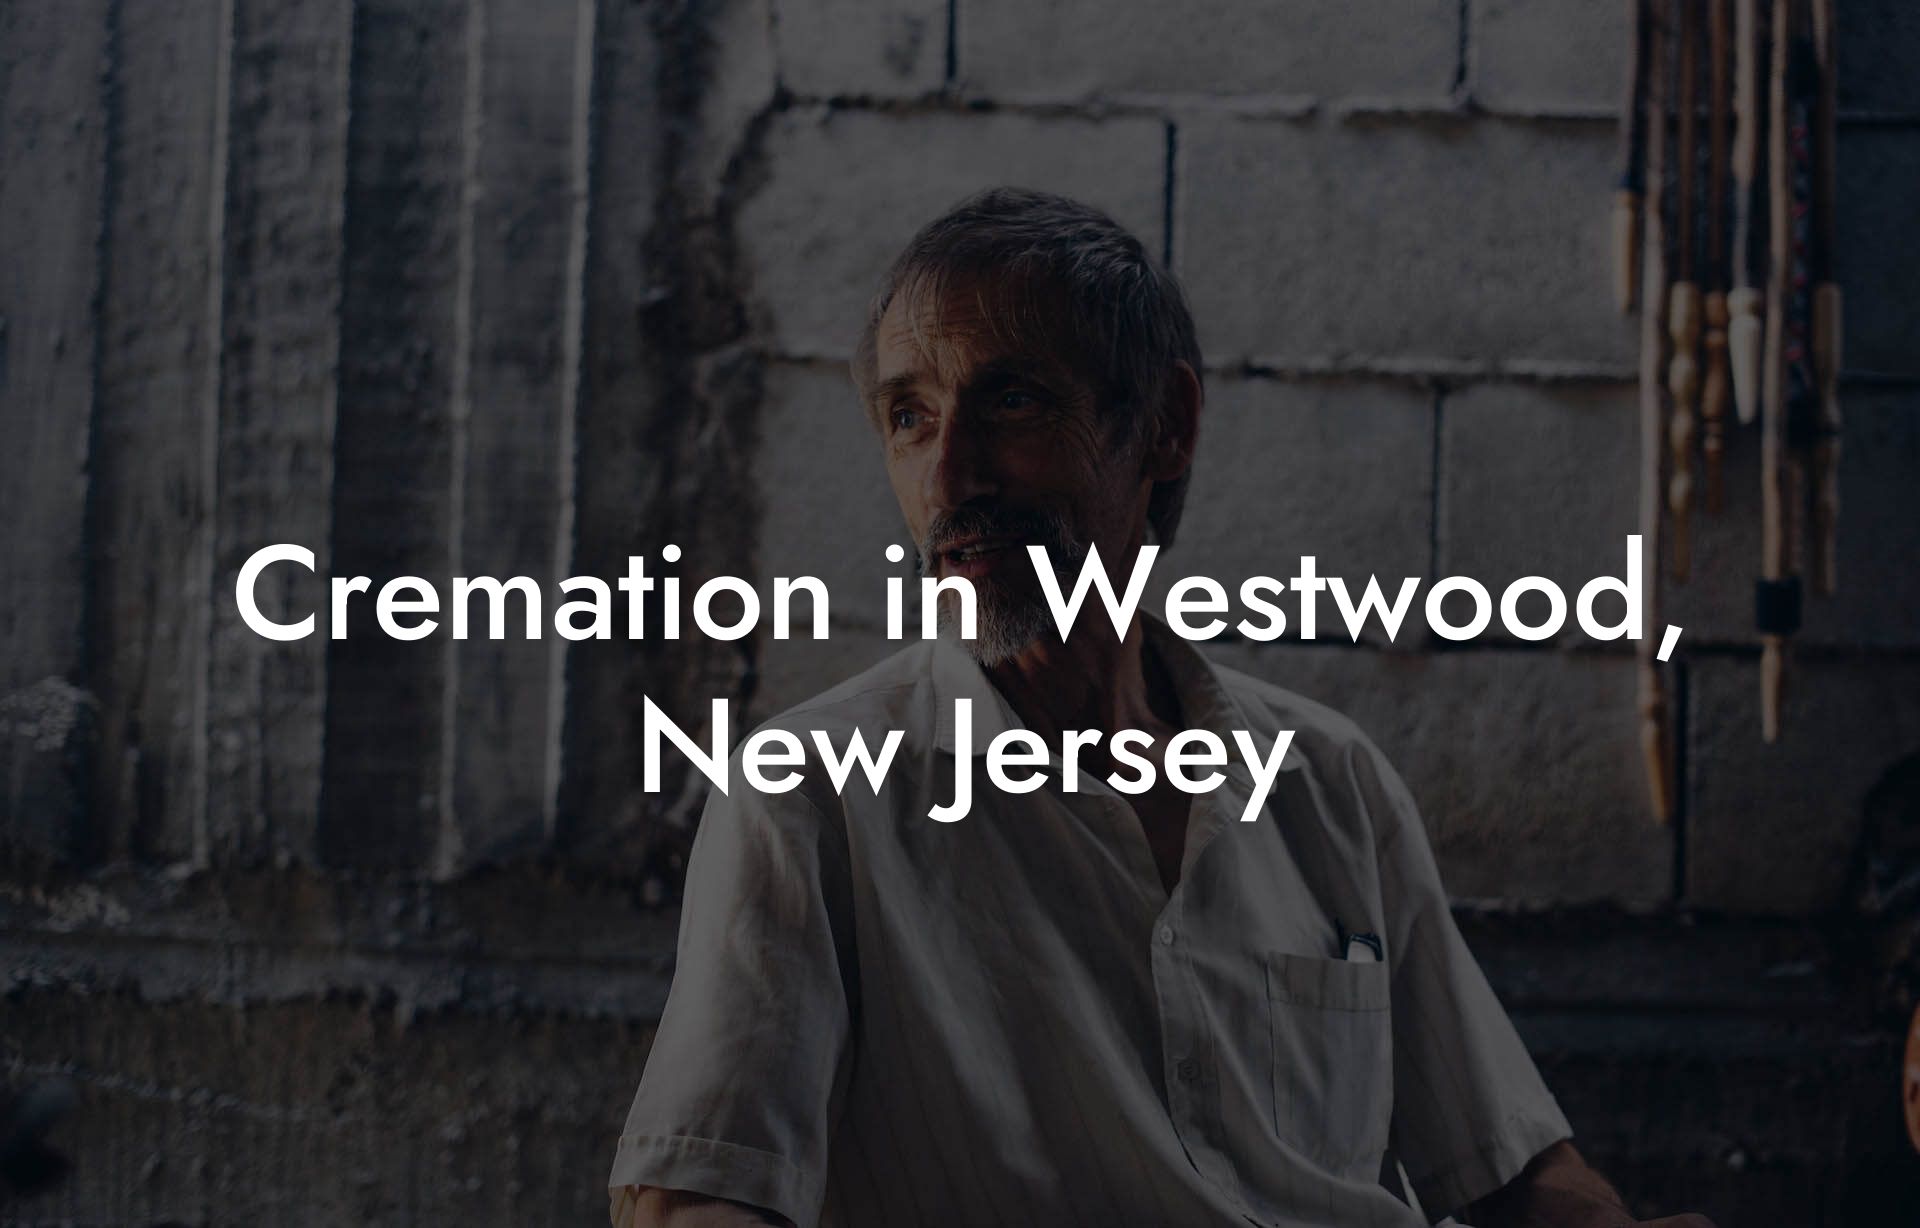 Cremation in Westwood, New Jersey